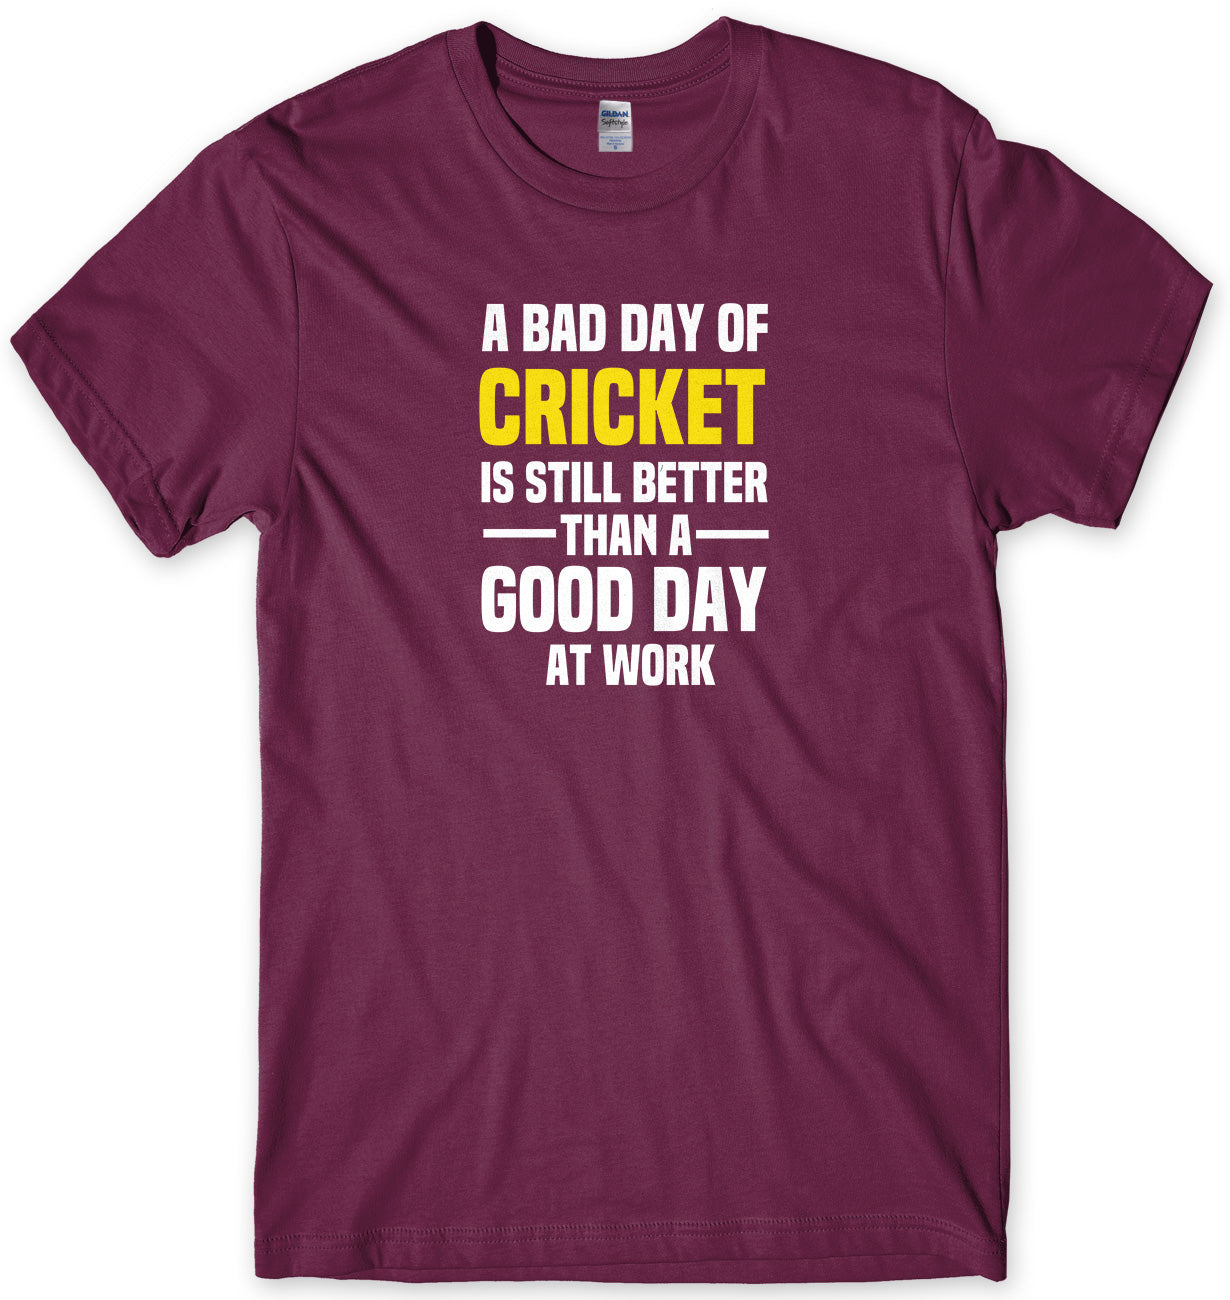 A BAD DAY OF CRICKET IS STILL BETTER THAN A GOOD DAY AT WORK MENS FUNNY SLOGAN UNISEX T-SHIRT - StreetSide Surgeons